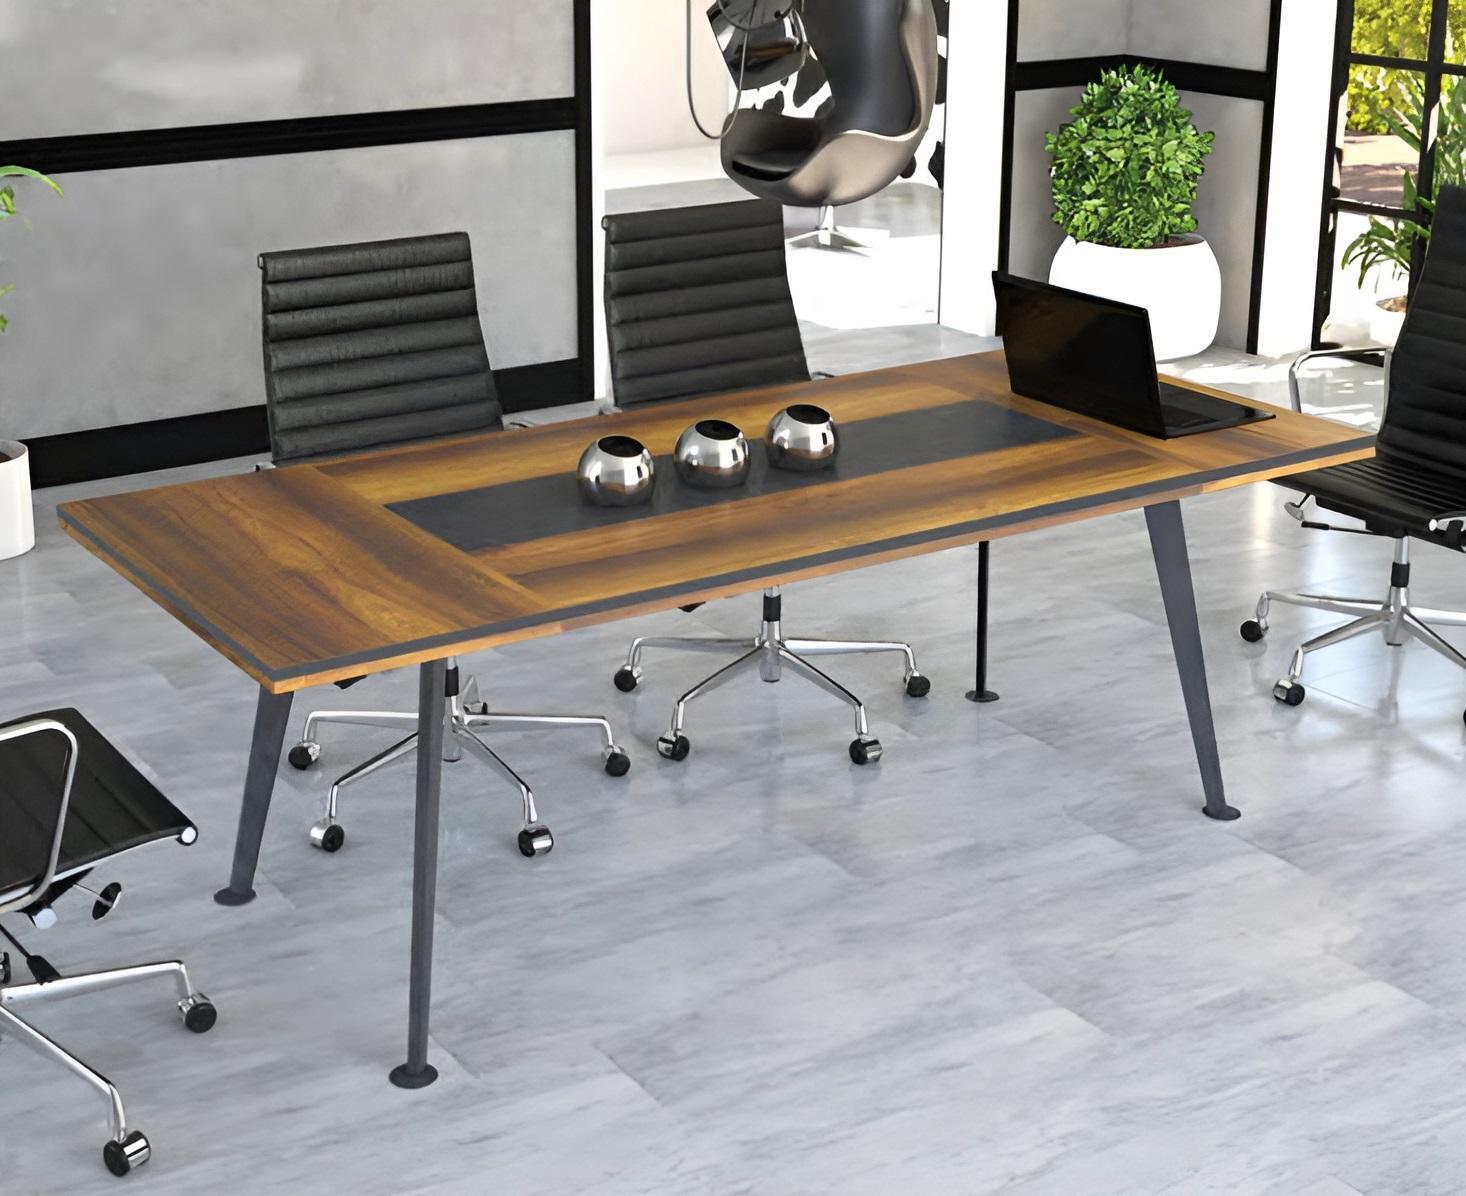 Large table conference table meeting tables conference furniture brown wood